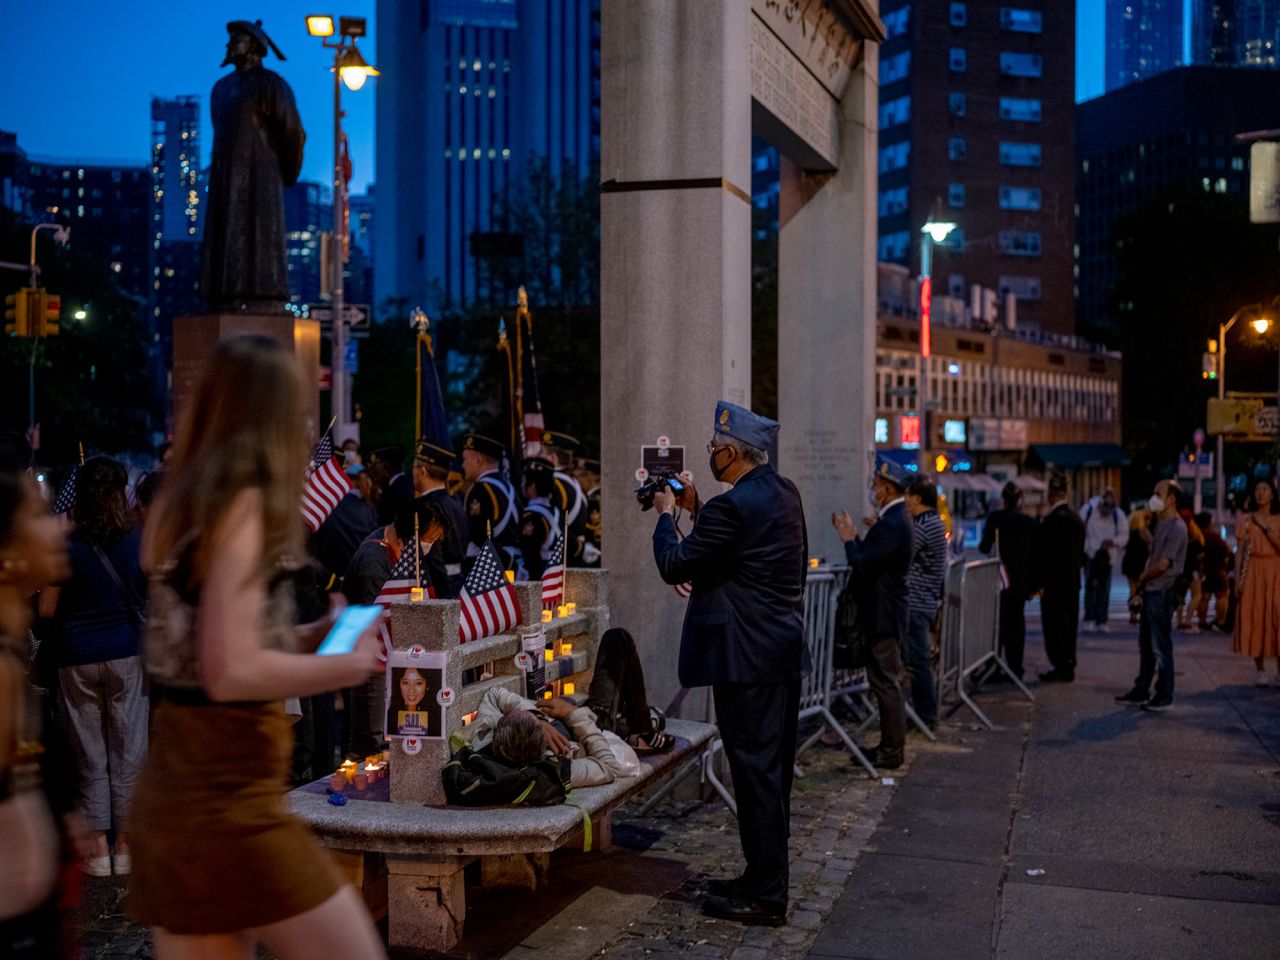 People watch a ceremony being held Saturday night in Chinatown in honor of Betty Ann Ong, the American Airlines flight attendant who alerted authorities to the hijacking before the first plane hit the World Trade Center.